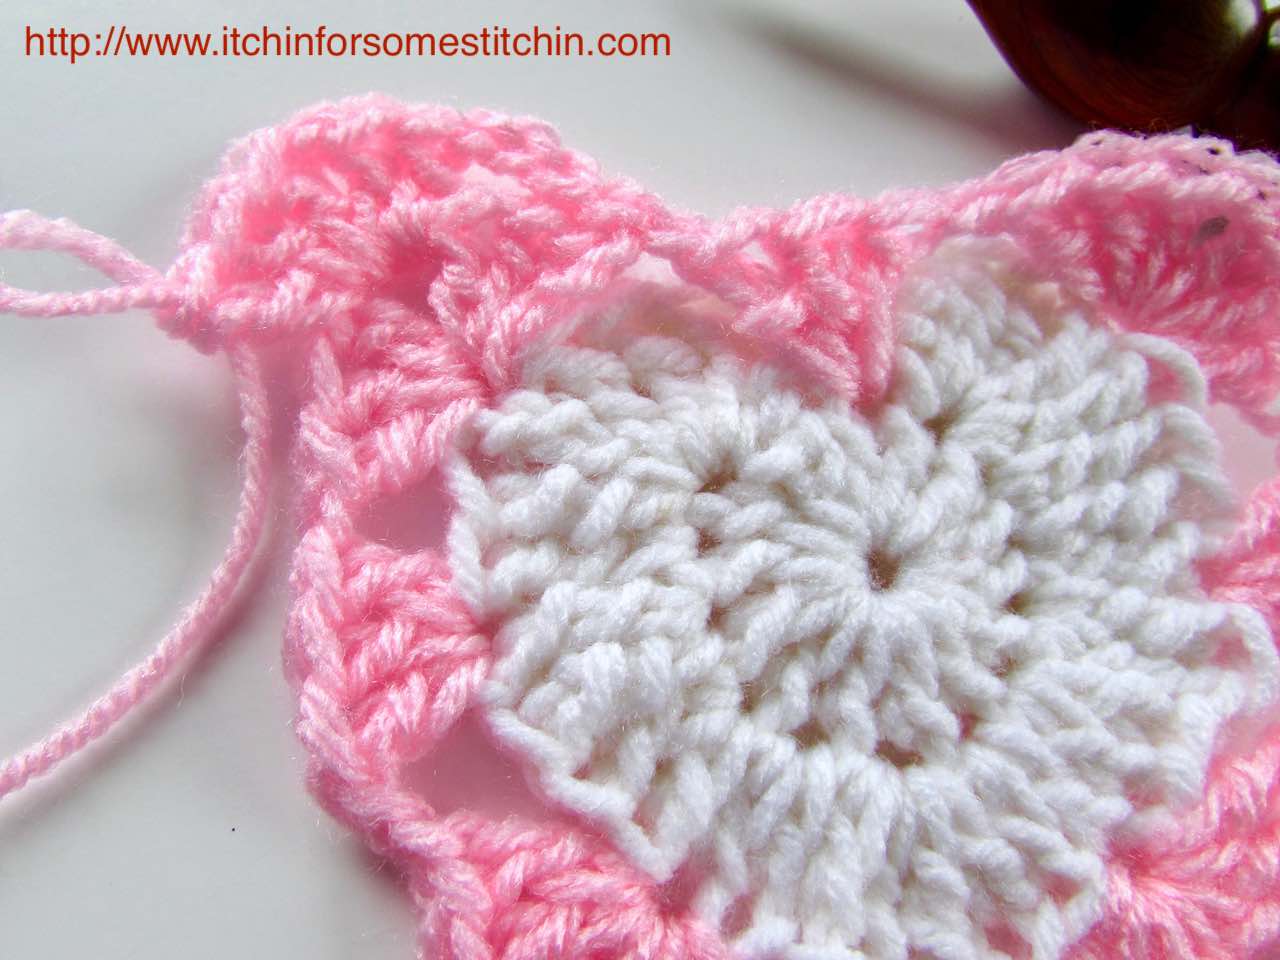 How to crochet a Granny Heart Square tutorial by http://www.itchinforsomestitchin.com